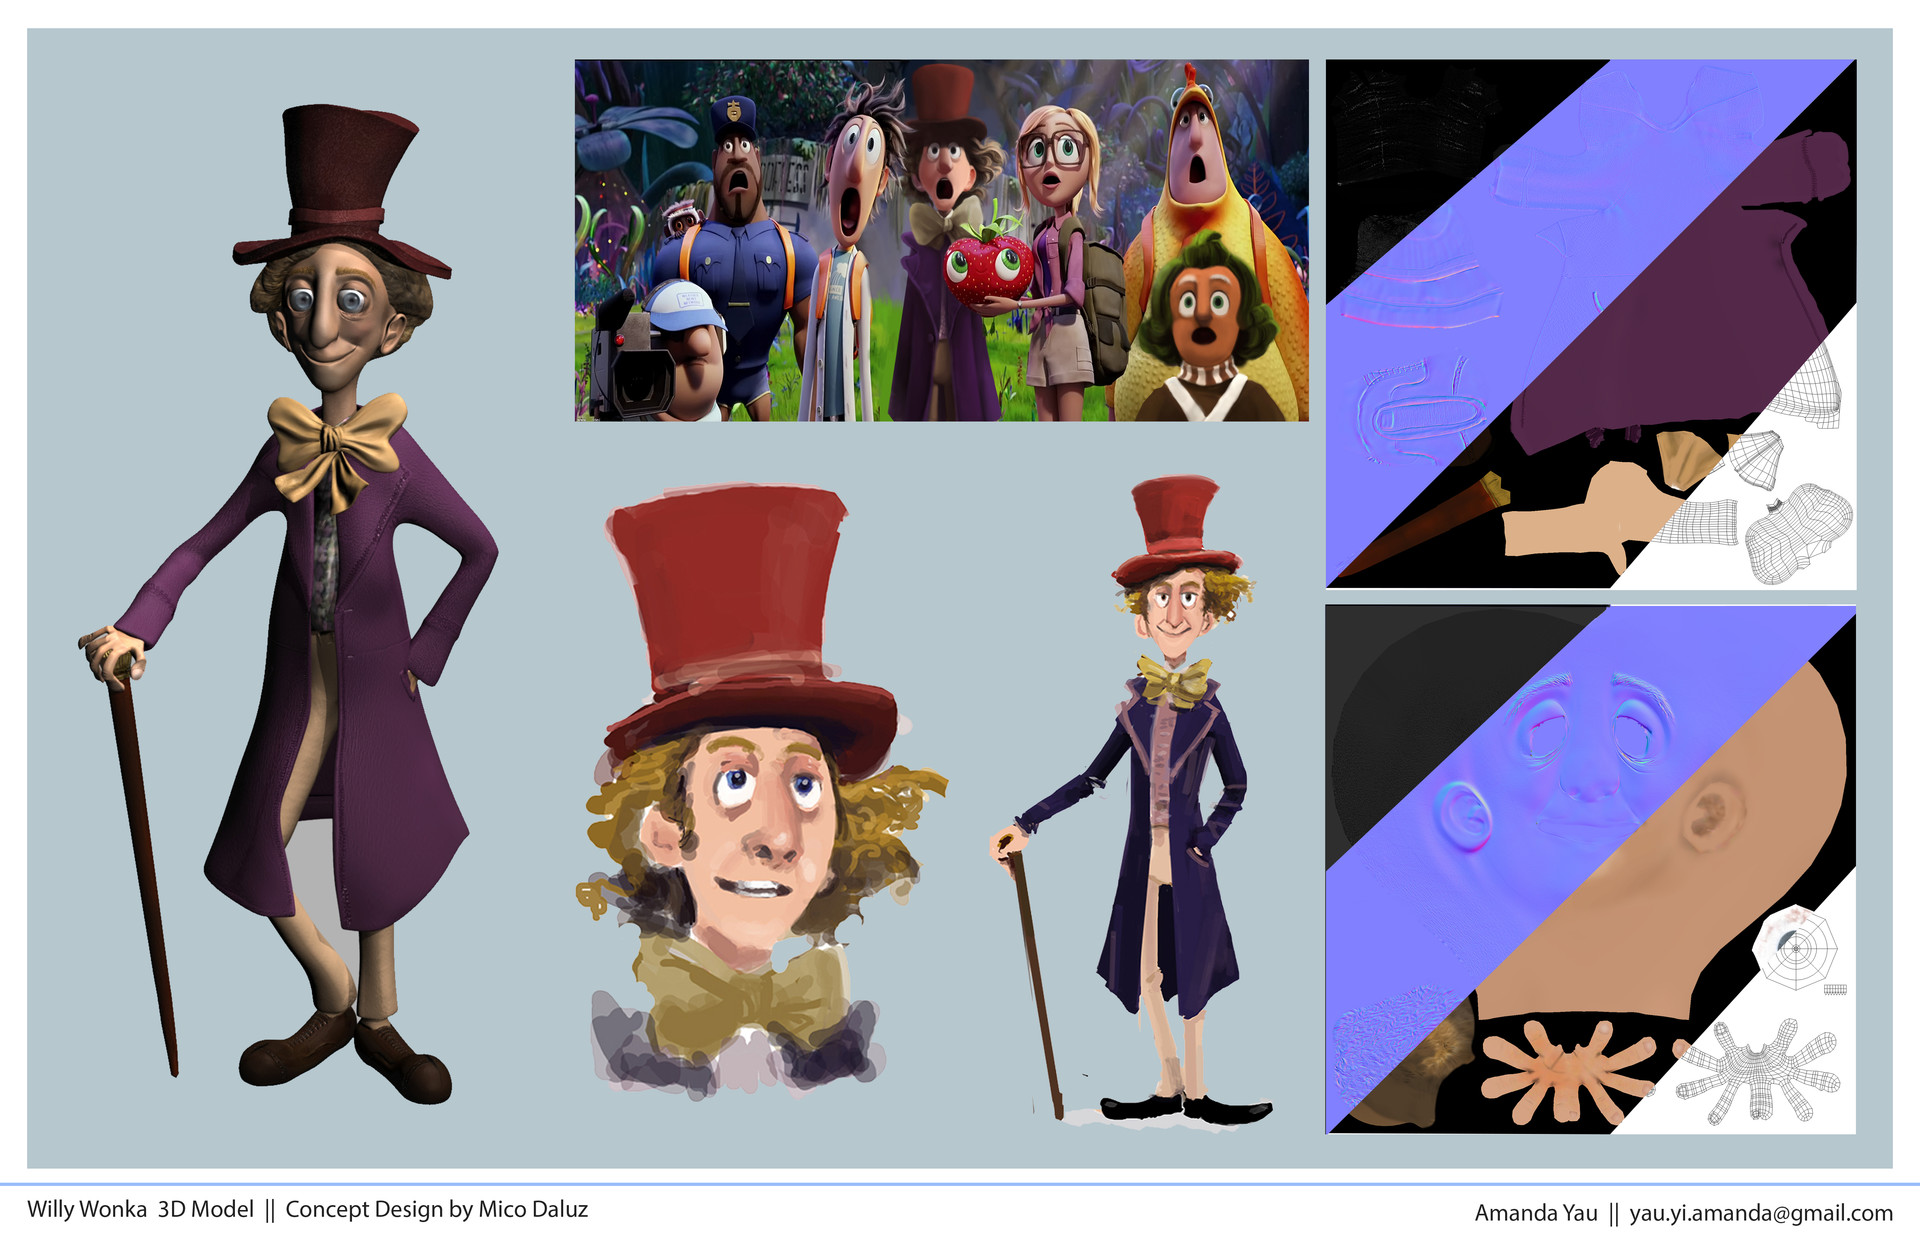 Willy Wonka from "Cloudy with a Chance of Meatballs" by Amanda Ya...